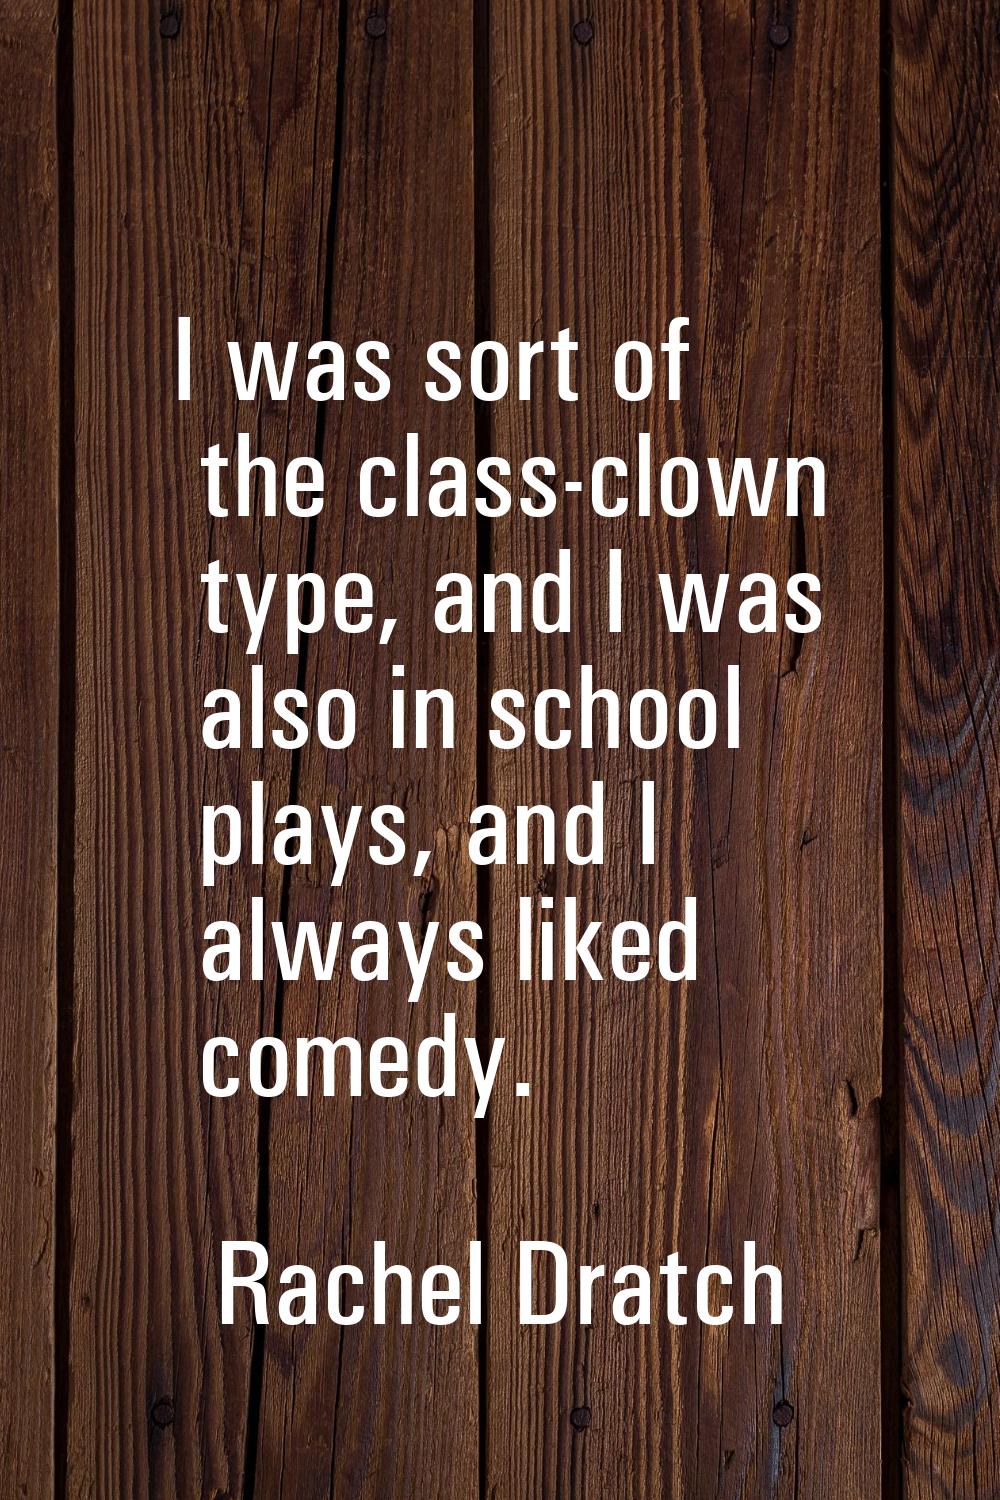 I was sort of the class-clown type, and I was also in school plays, and I always liked comedy.